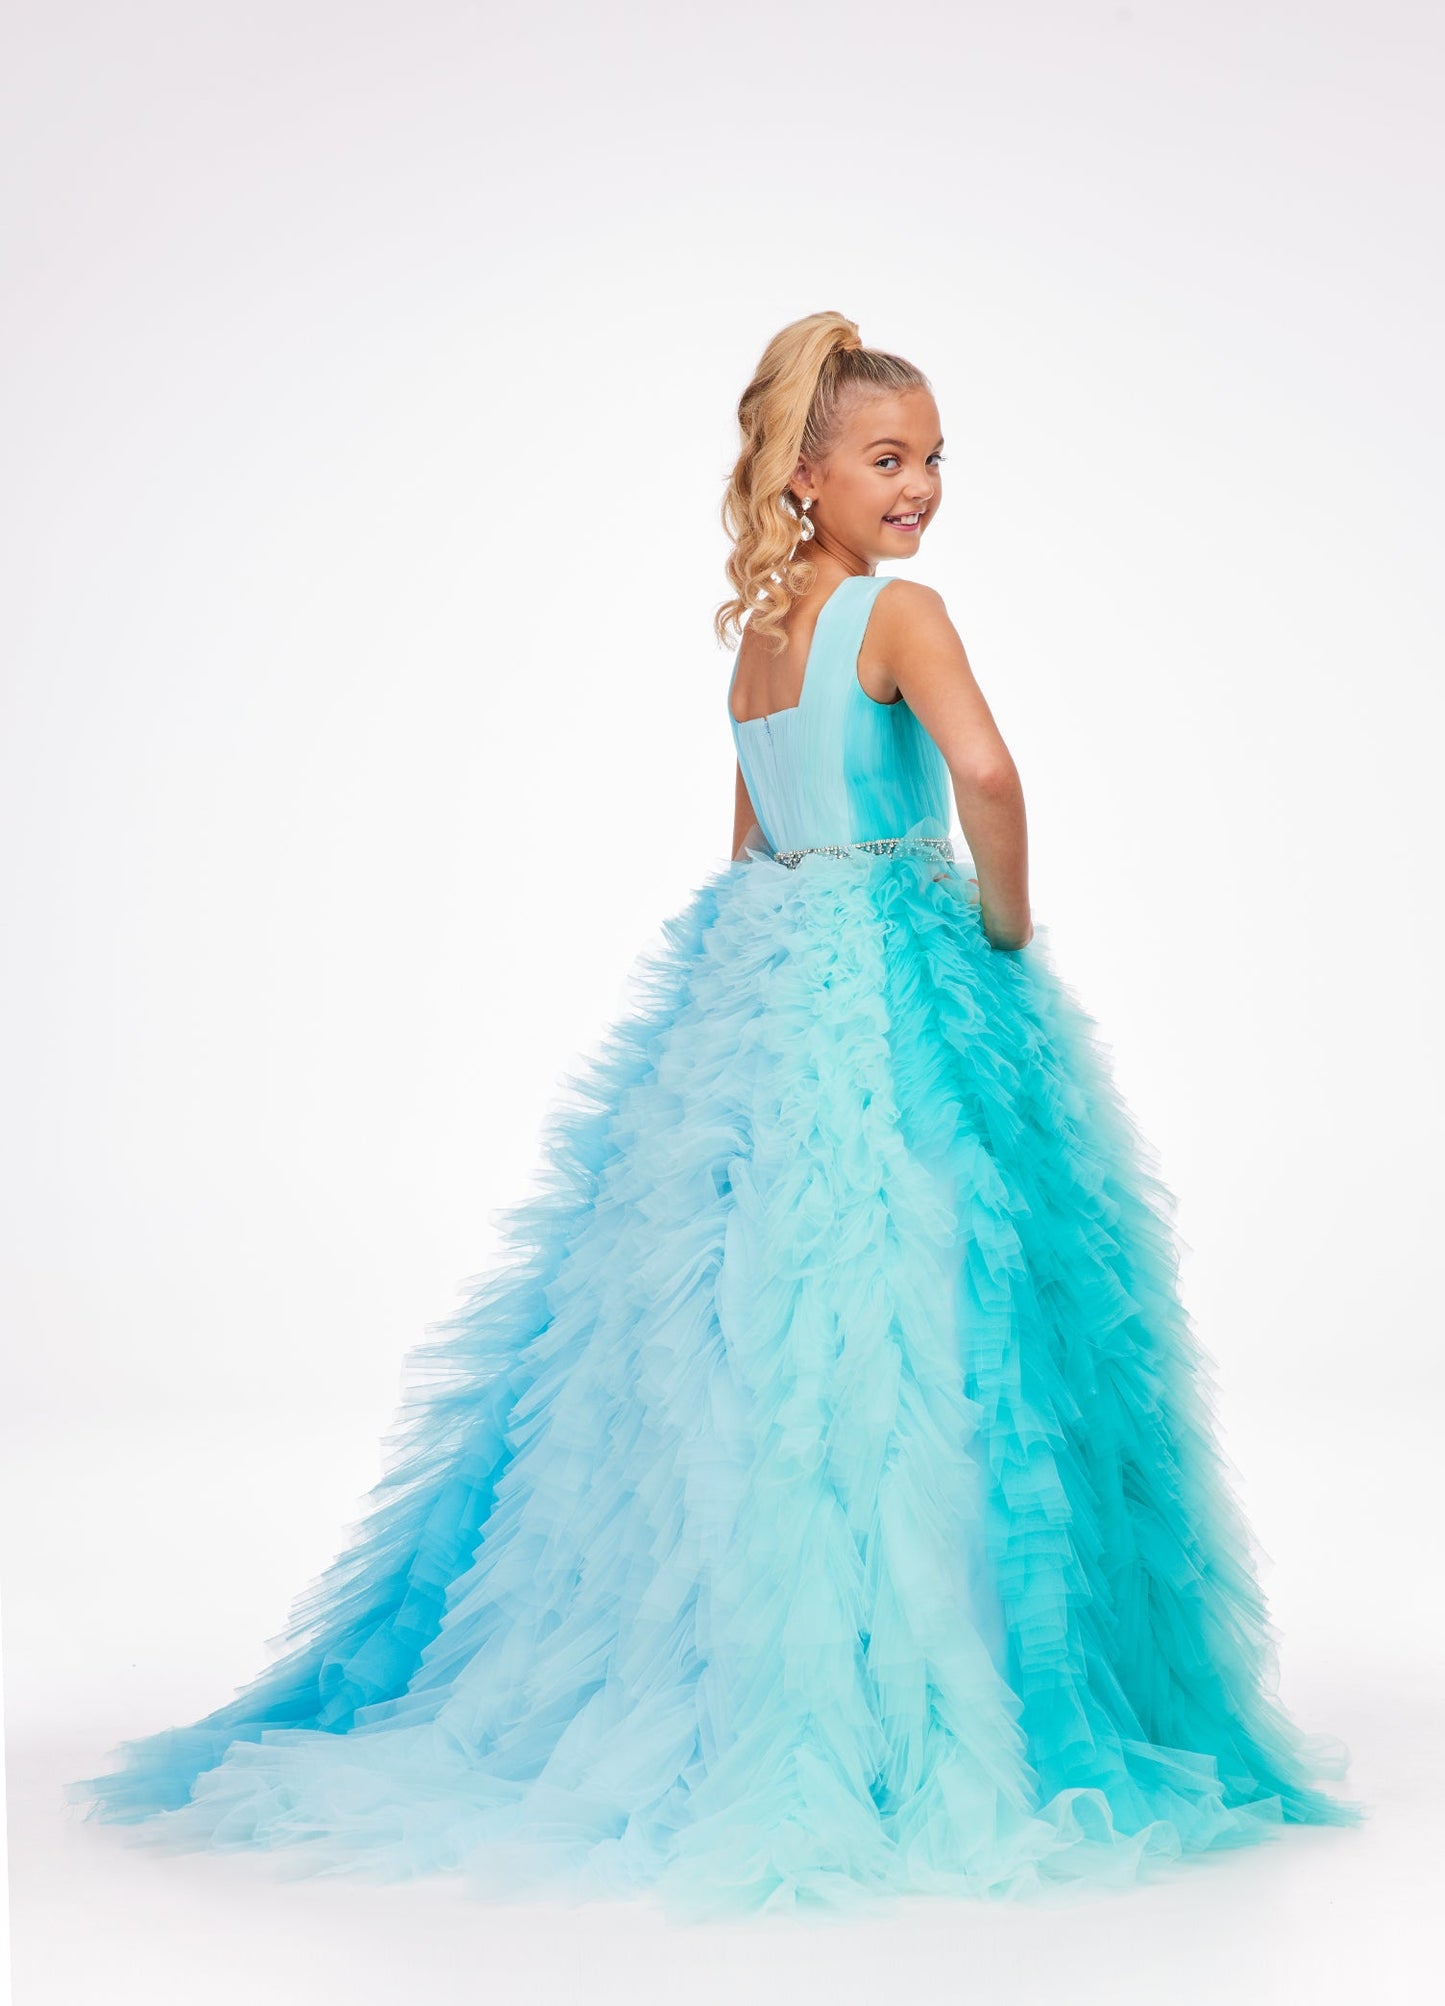 Ashley Lauren Kids 8137 Girls and Preteens Pageant Dress.  This stand out kids gown features a square neckline giving way to a crystal encrusted belt. The ombre tulle skirt completes the look.  Available colors:  Pink Multi, Blue Multi  Available sizes:  4, 6, 8, 10, 12, 14, 16